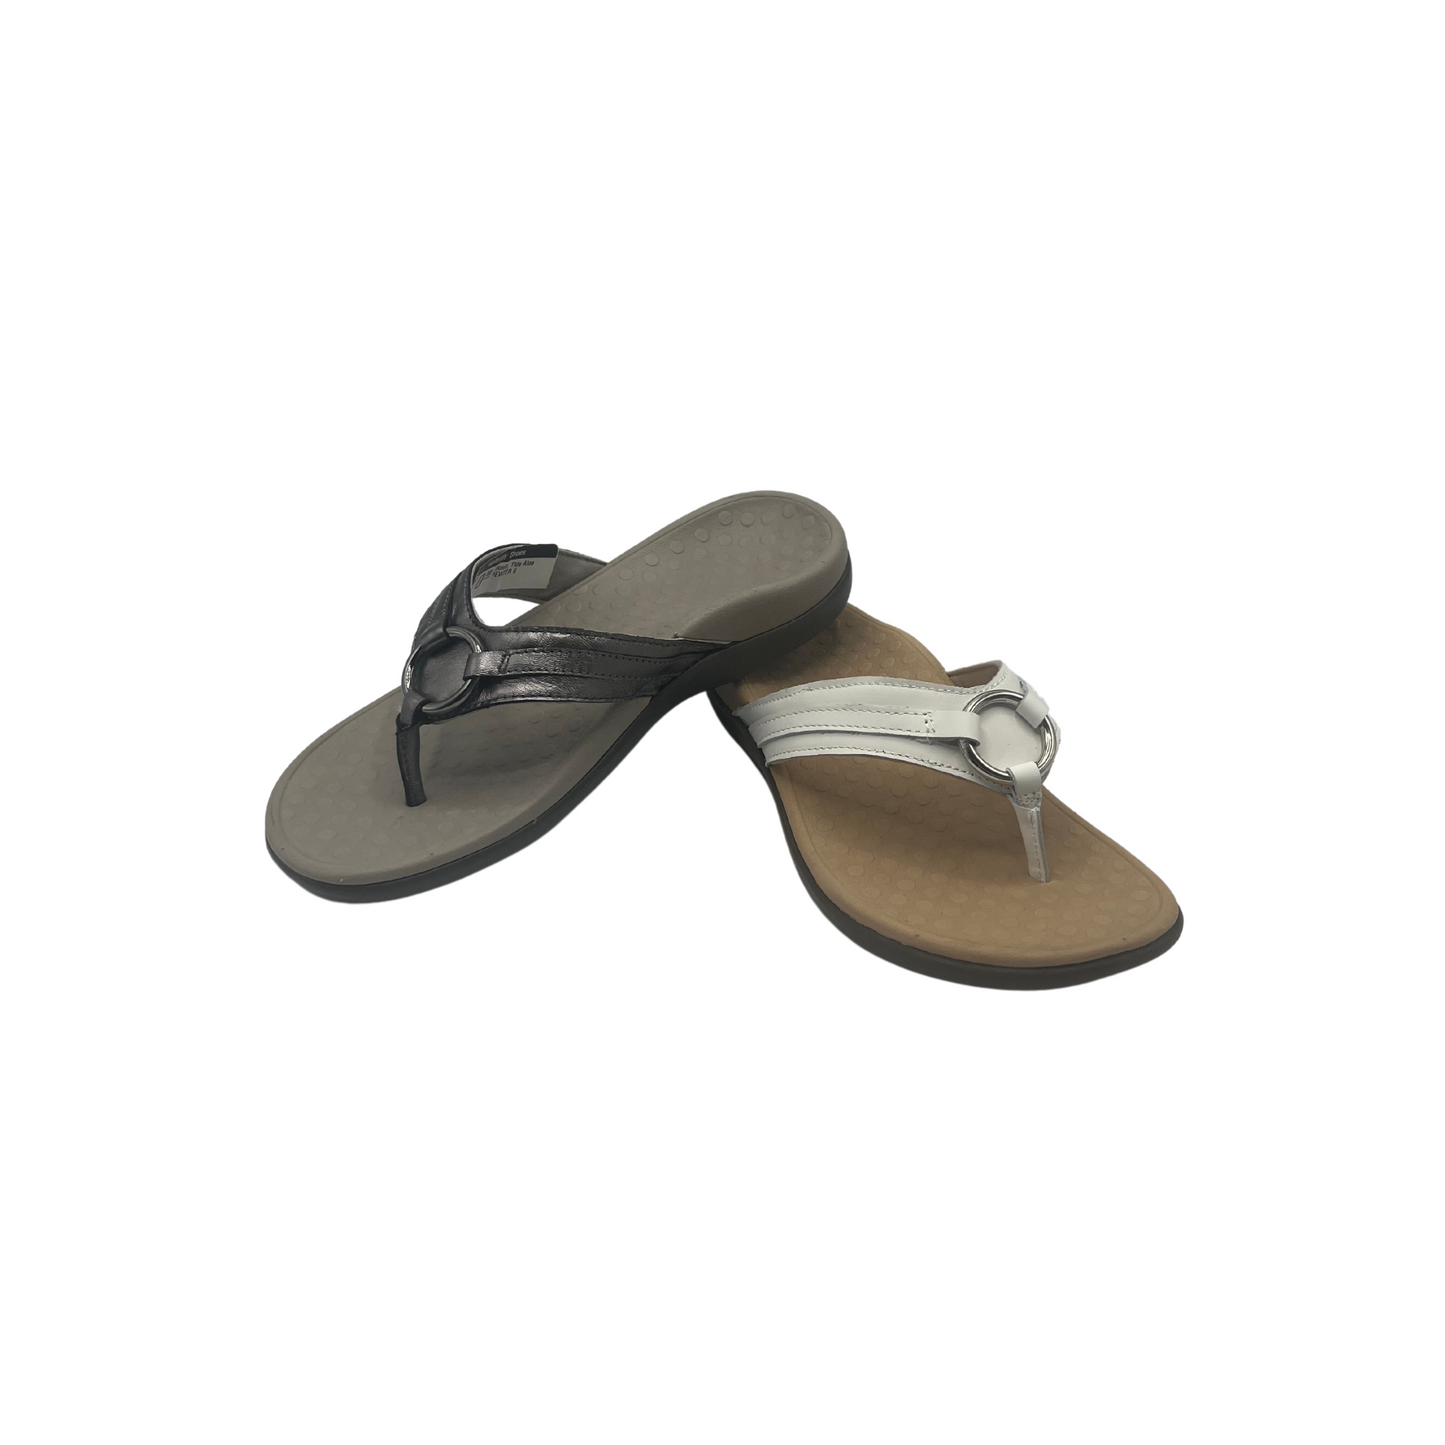 The Vionic Tide Aloe in pewter and white offers unique biomechanical orthotic footbed technology, providing superior arch support and cushioning for all-day comfort. 